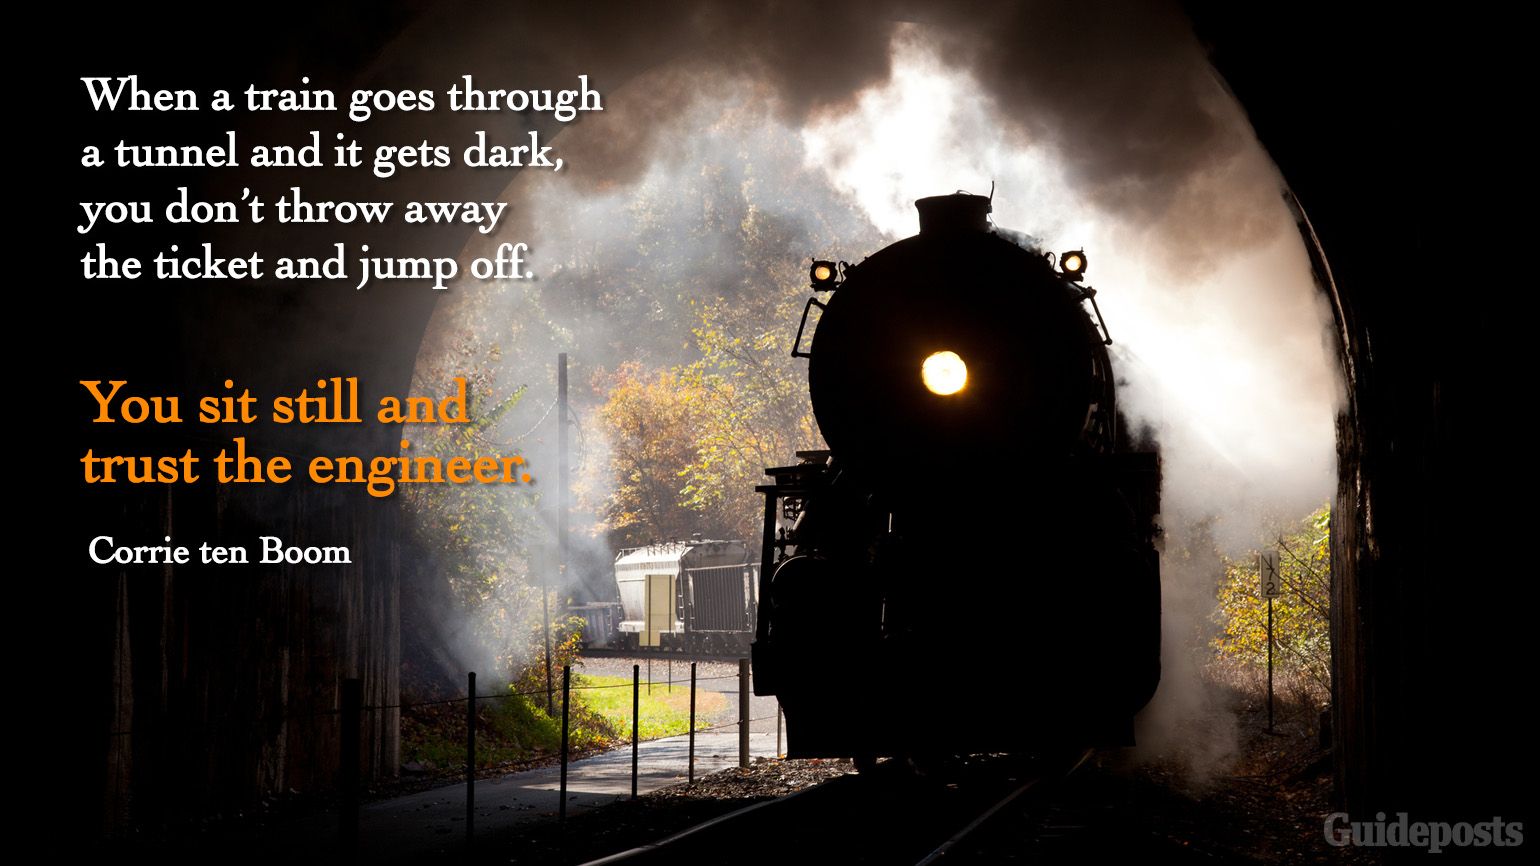 "When a train goes through a tunnel and it gets dark, you don’t throw away the ticket and jump off. You sit still and trust the engineer." Inspiring Corrie ten Boom quotes